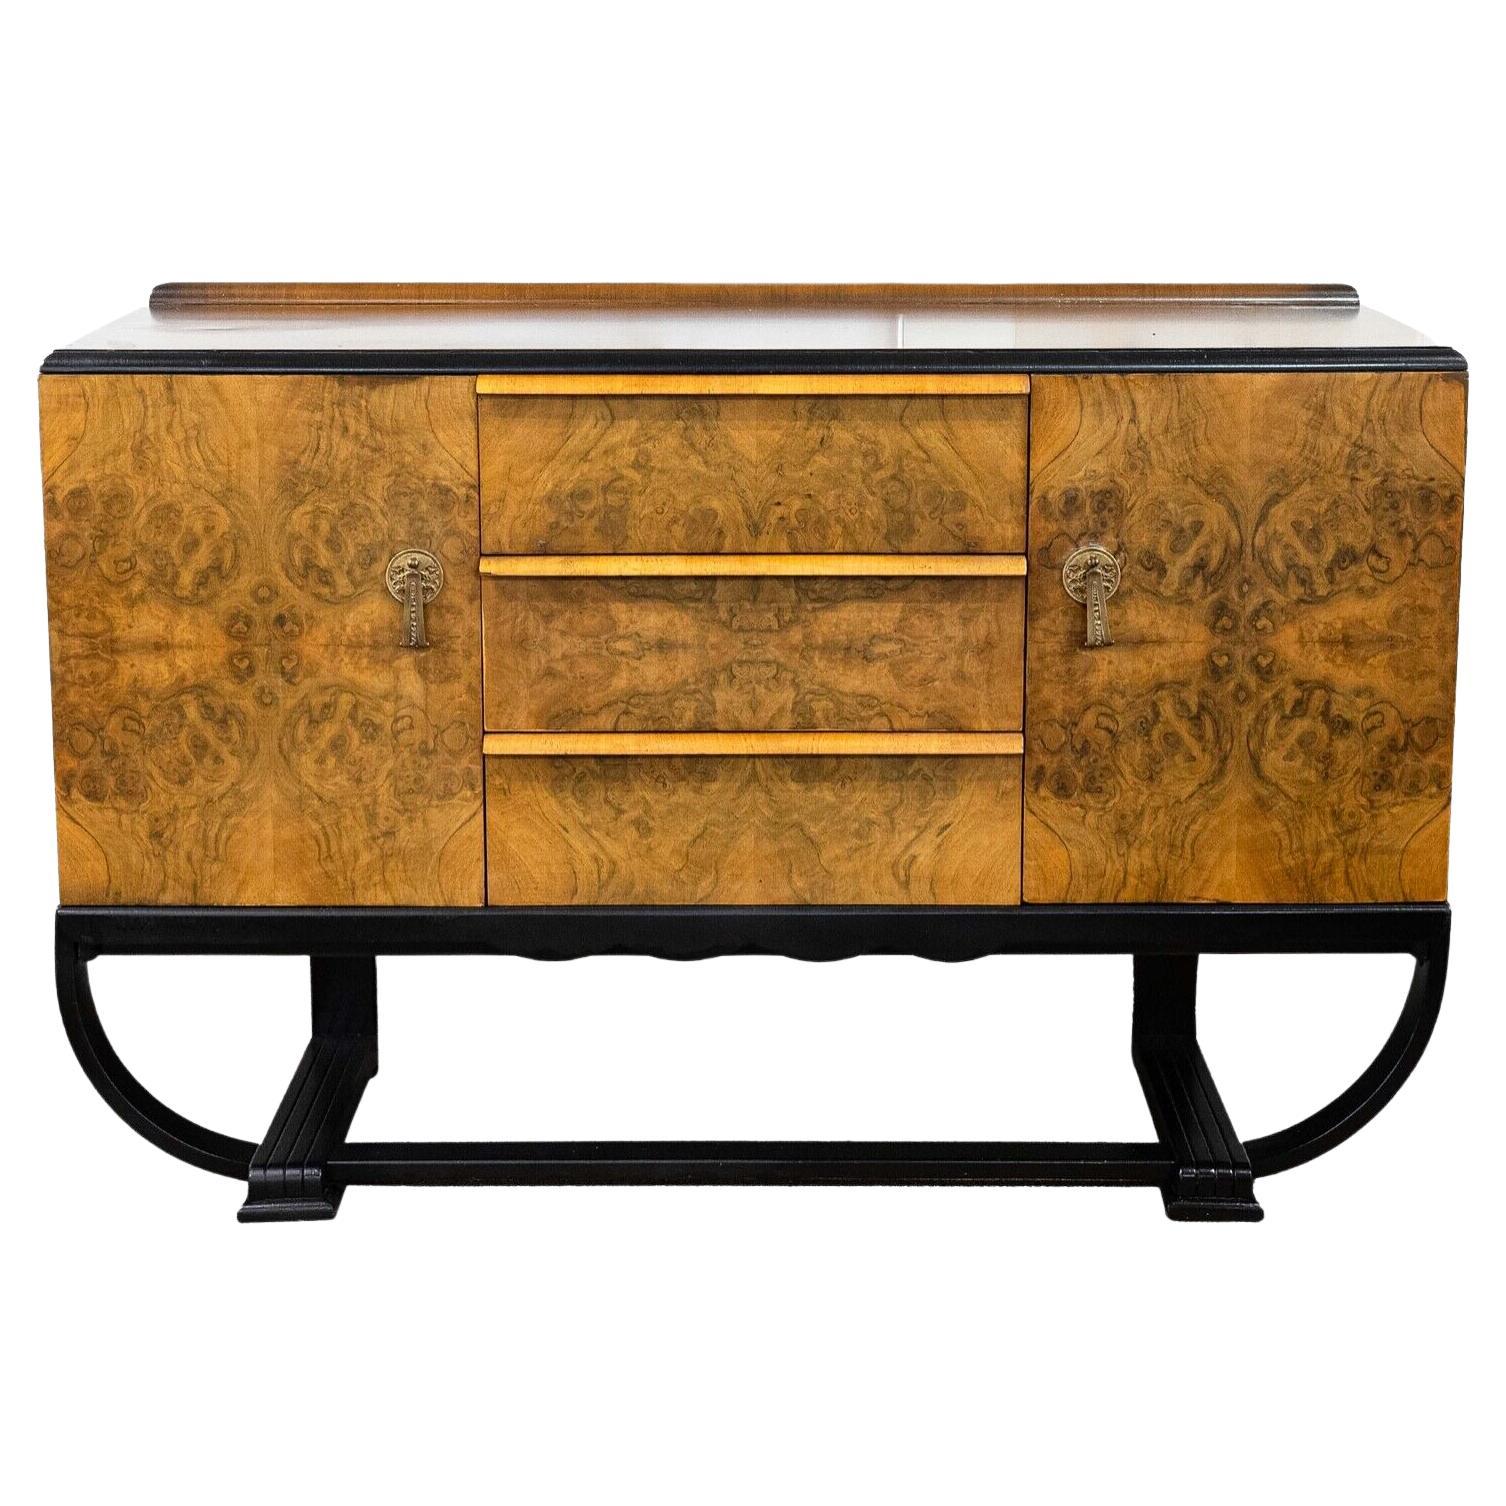 Vintage Art Deco Burlwood Buffet Credenza or Bar by Beautility